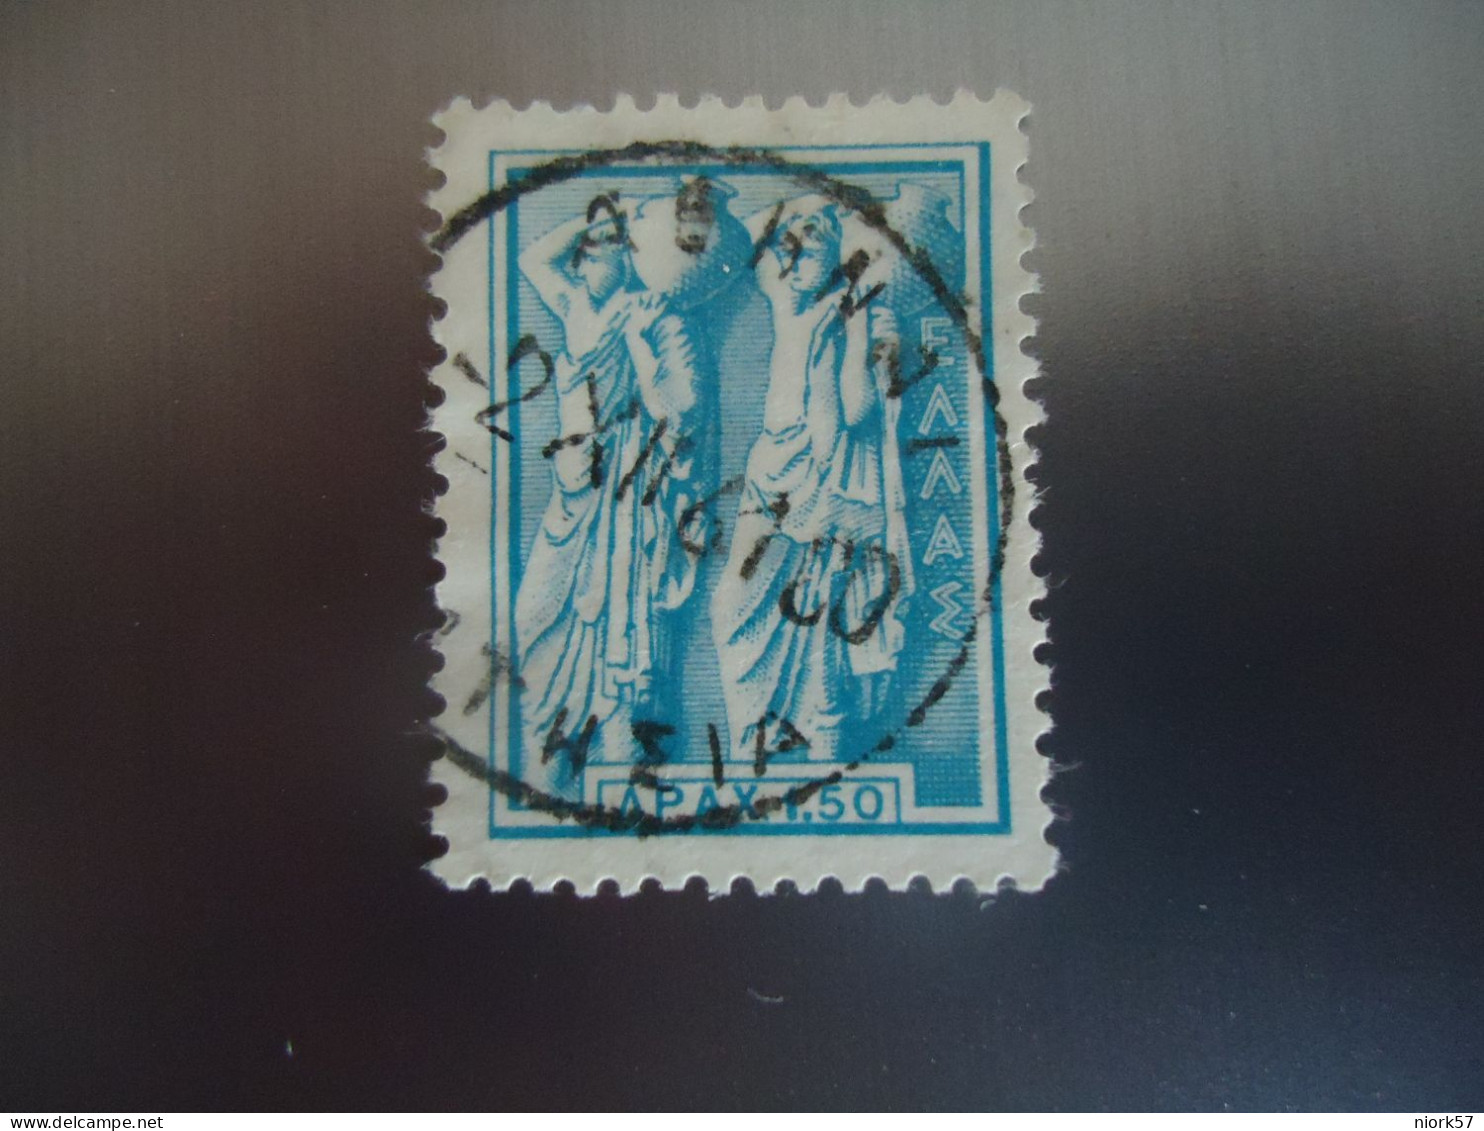 GREECE   USED STAMPS  POSTMARK  ΑΘΗΝΑΙ   ΠΑΤΗΣΙΑ 1961 - Used Stamps